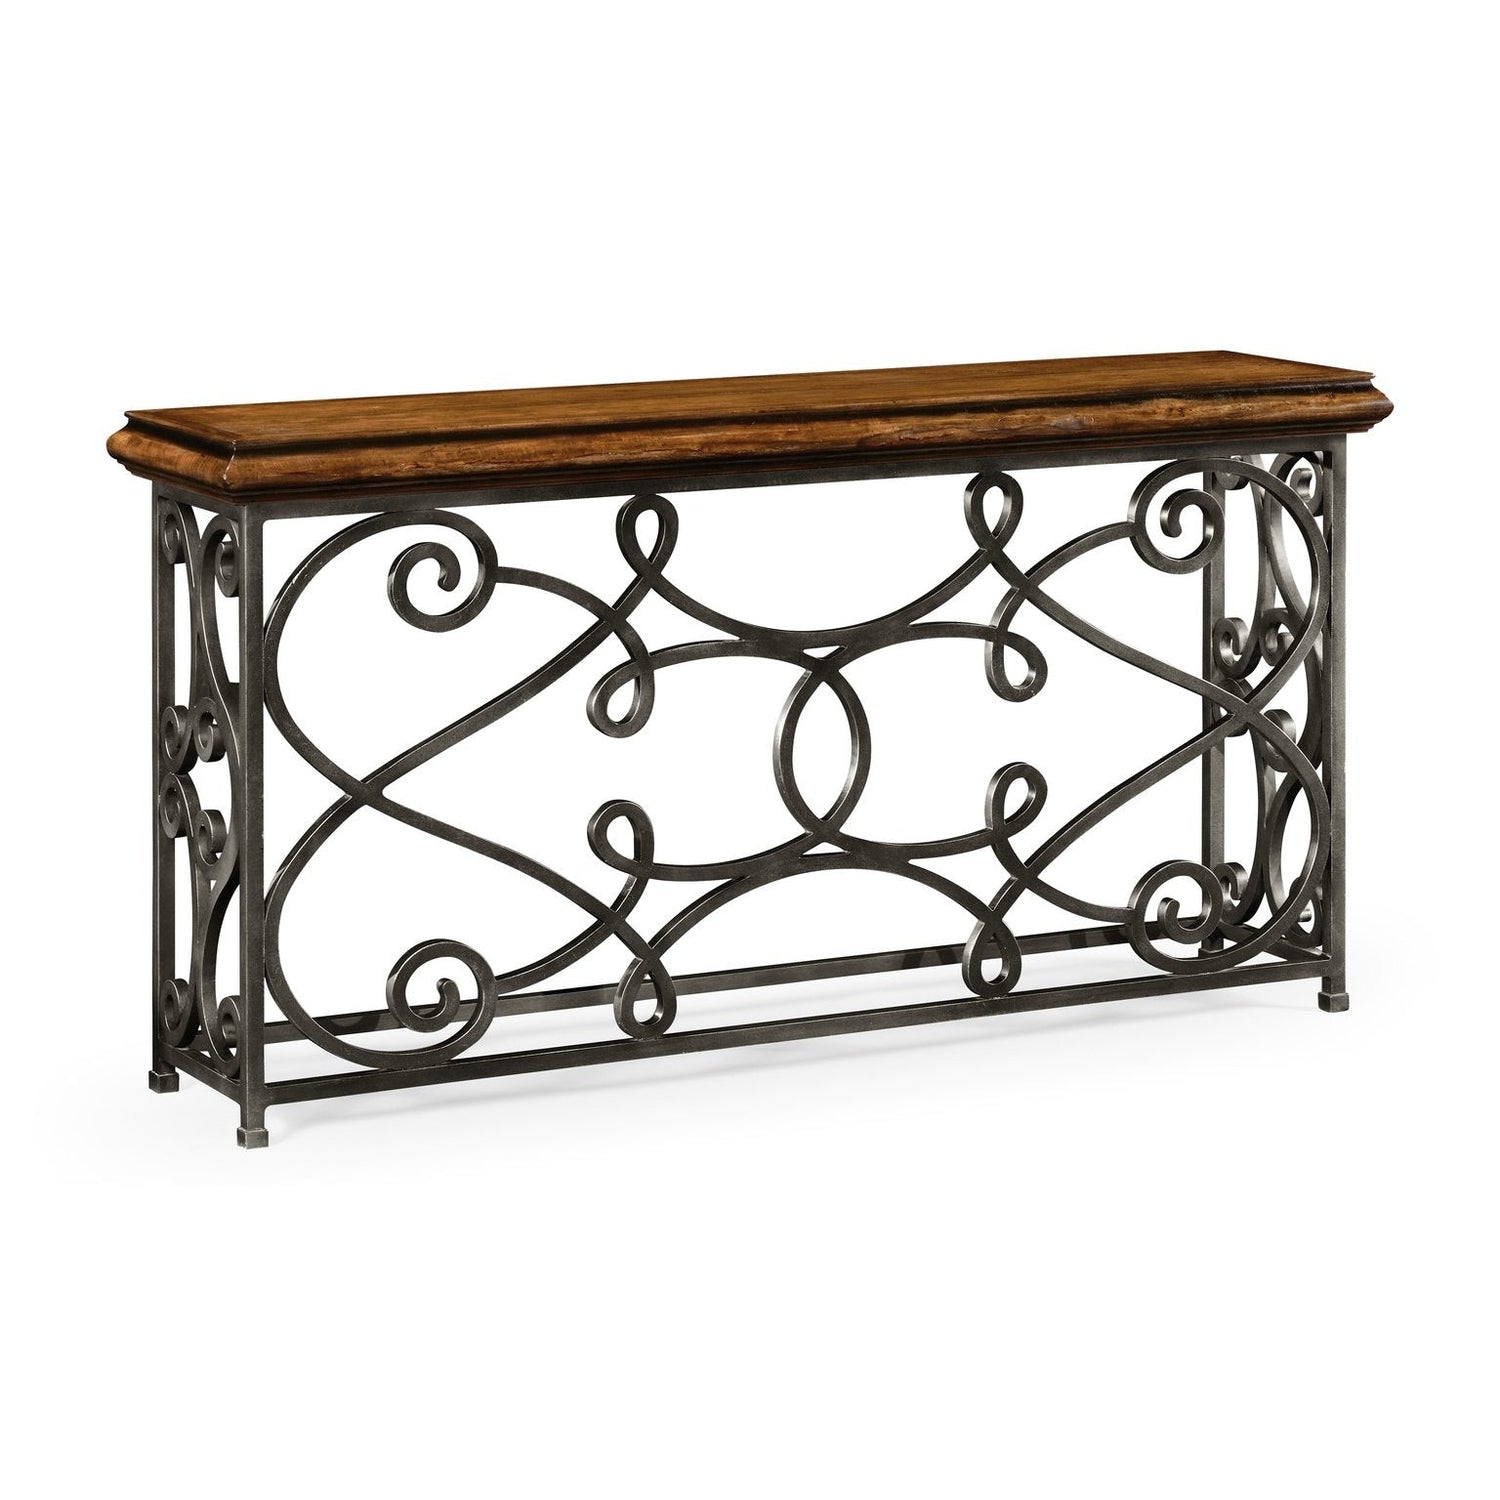 Jonathan Charles, 72" Width Rectangular Rustic Walnut Console with Wrought Iron Base